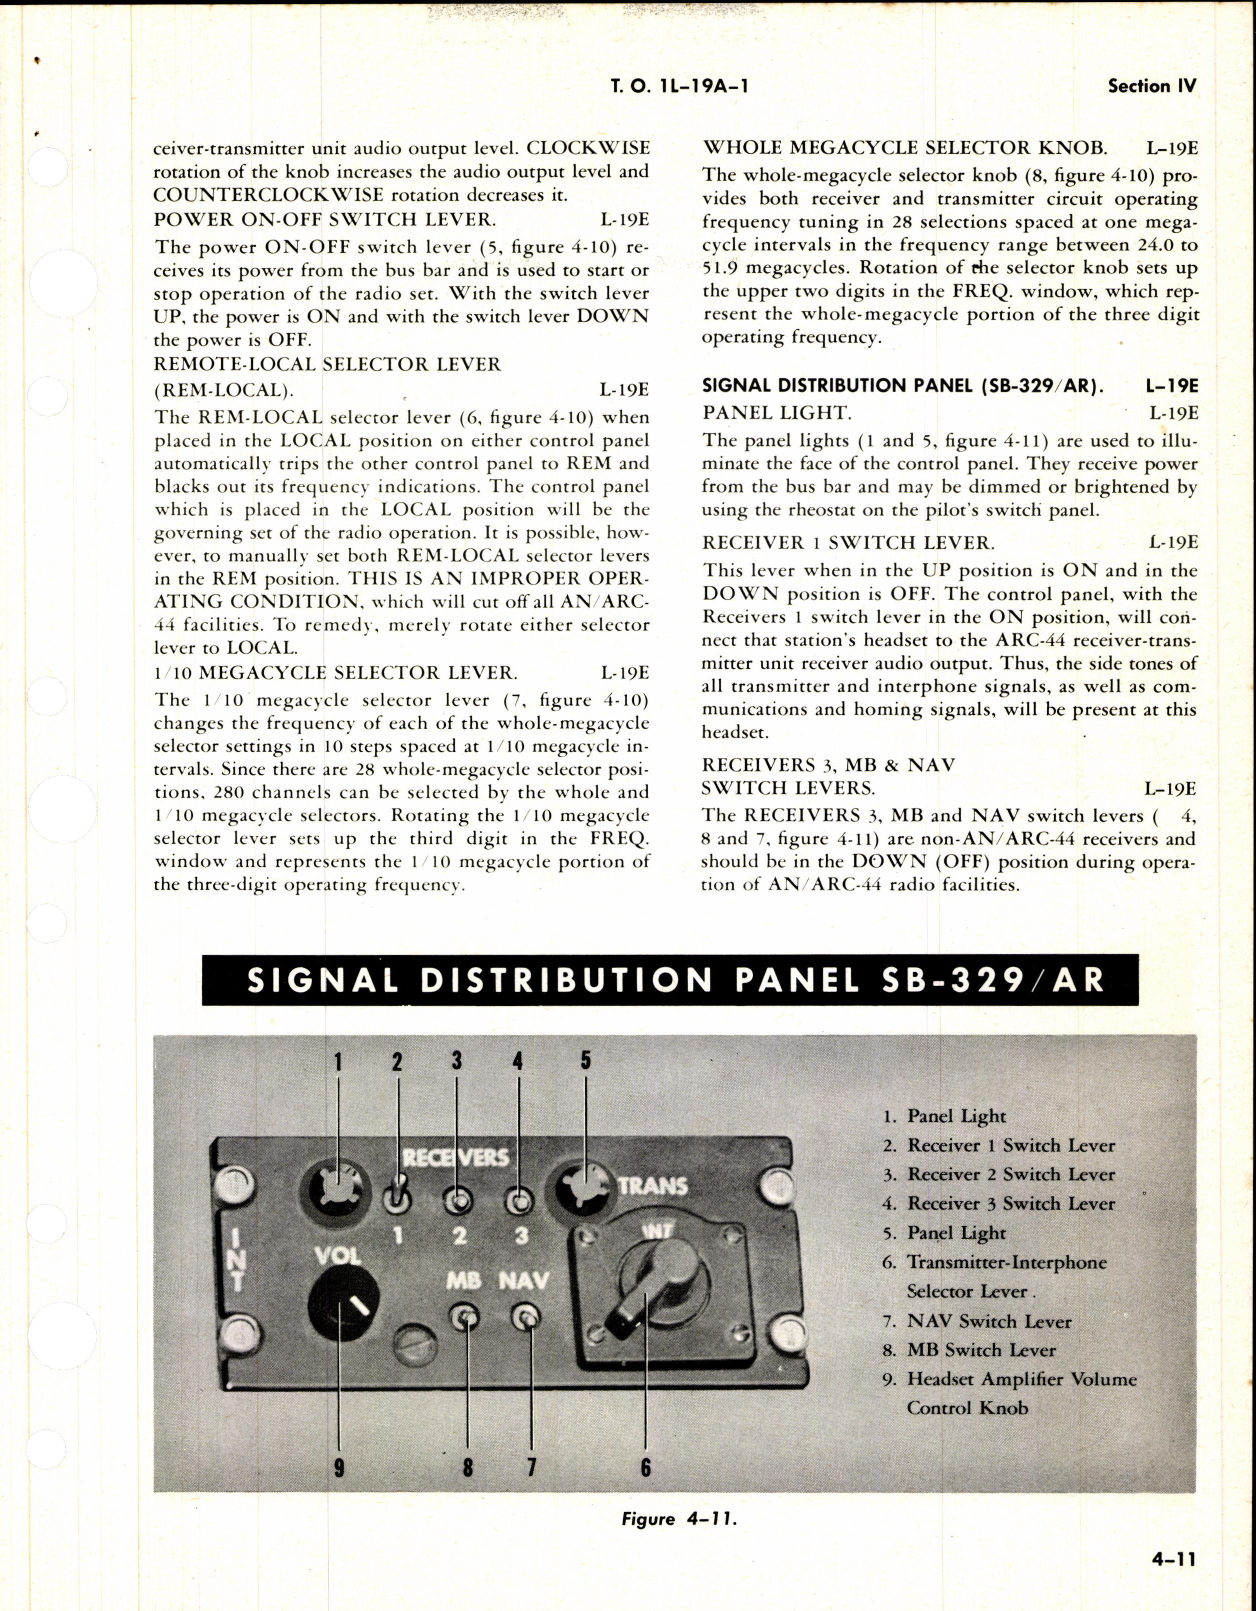 Sample page 5 from AirCorps Library document: Flight Handbook for L-19A and L-19E Aircraft